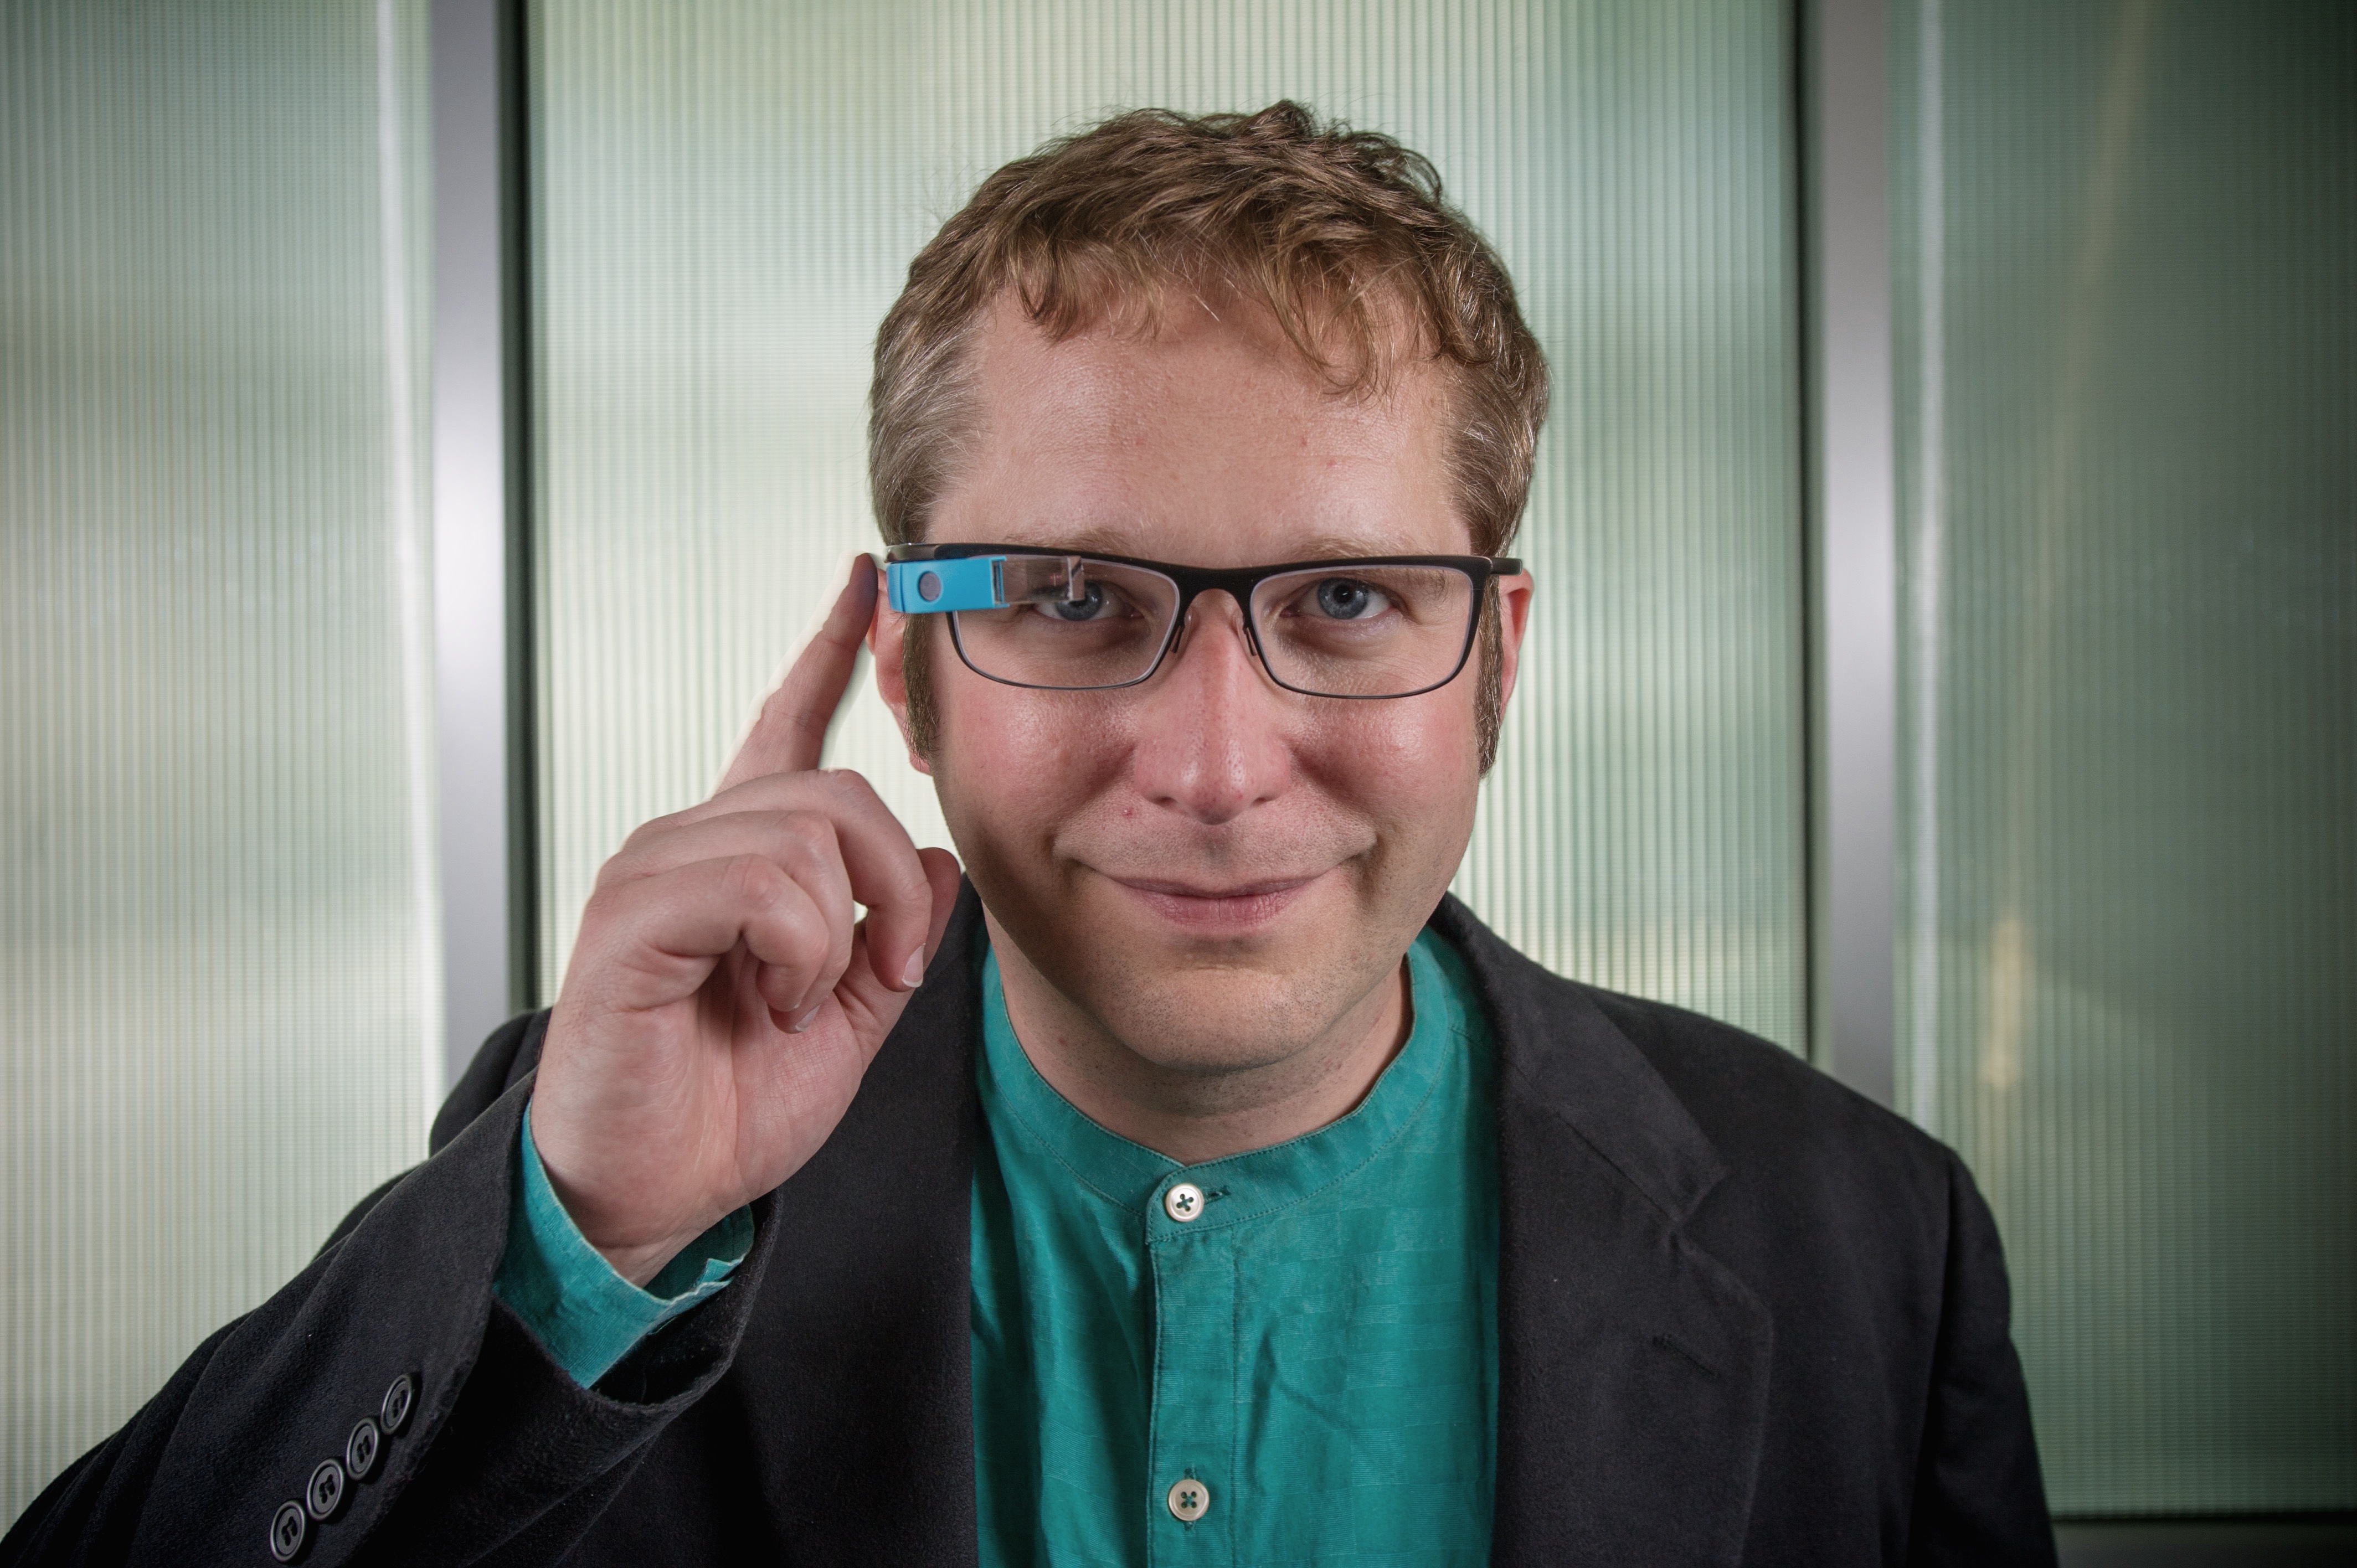 College of Computing Professor Thad Starner, director of the Contextual Computing Group at Georgia Tech and technical lead/manager on Google's Project Glass.